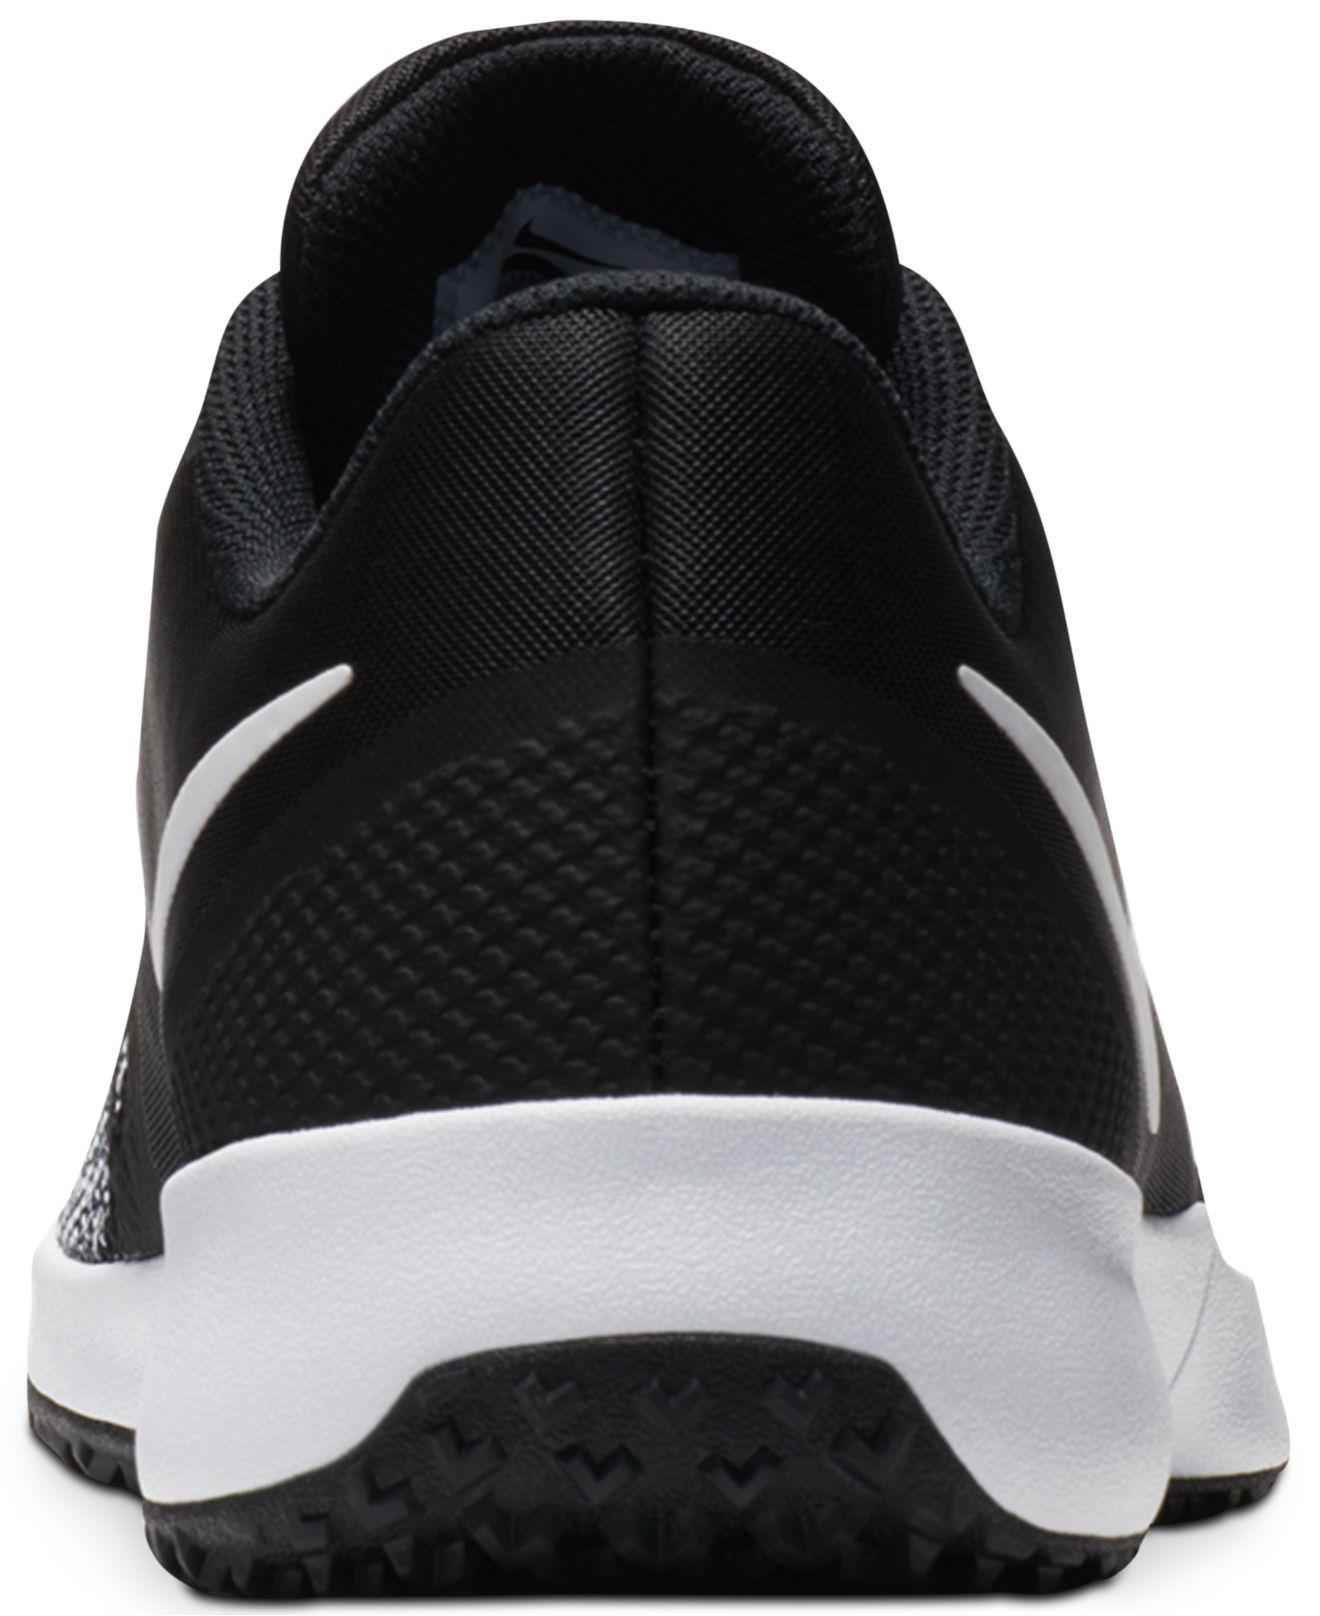 men's varsity compete trainer training sneakers from finish line